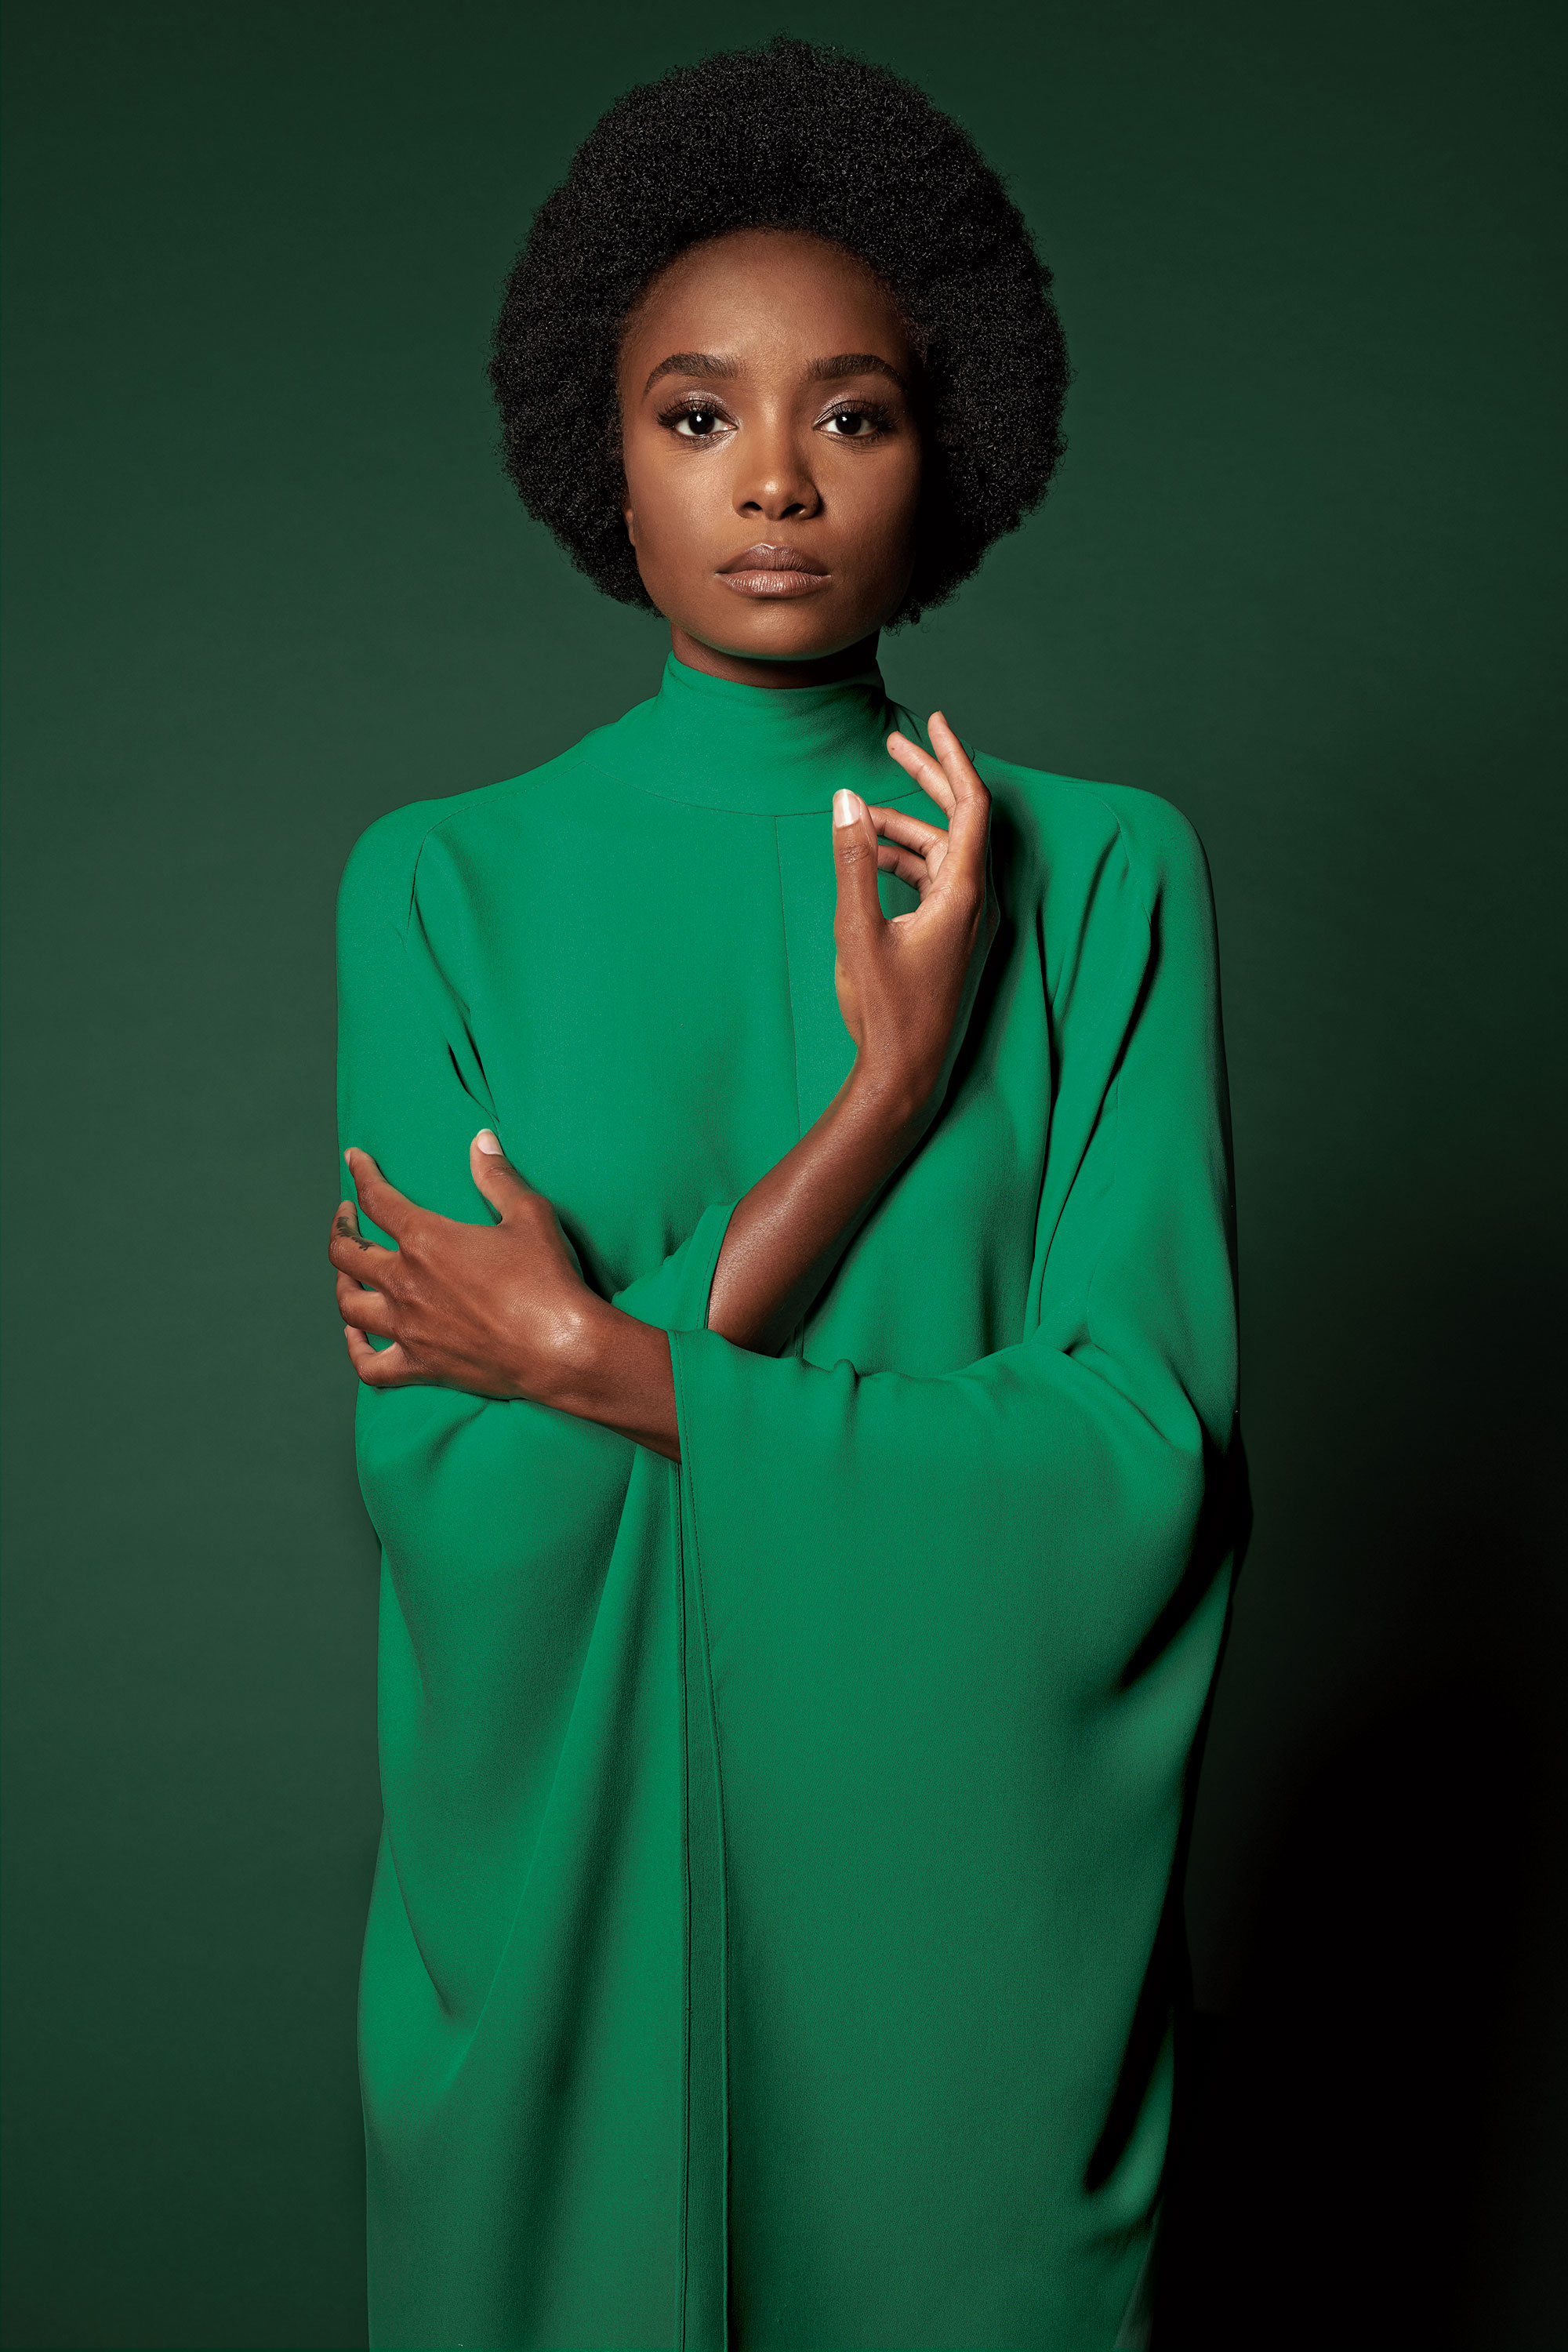   Amanda Demme  photographed Kiki Layne for New York Magazine in August 2018. Styled by Rebecca Ramsey 